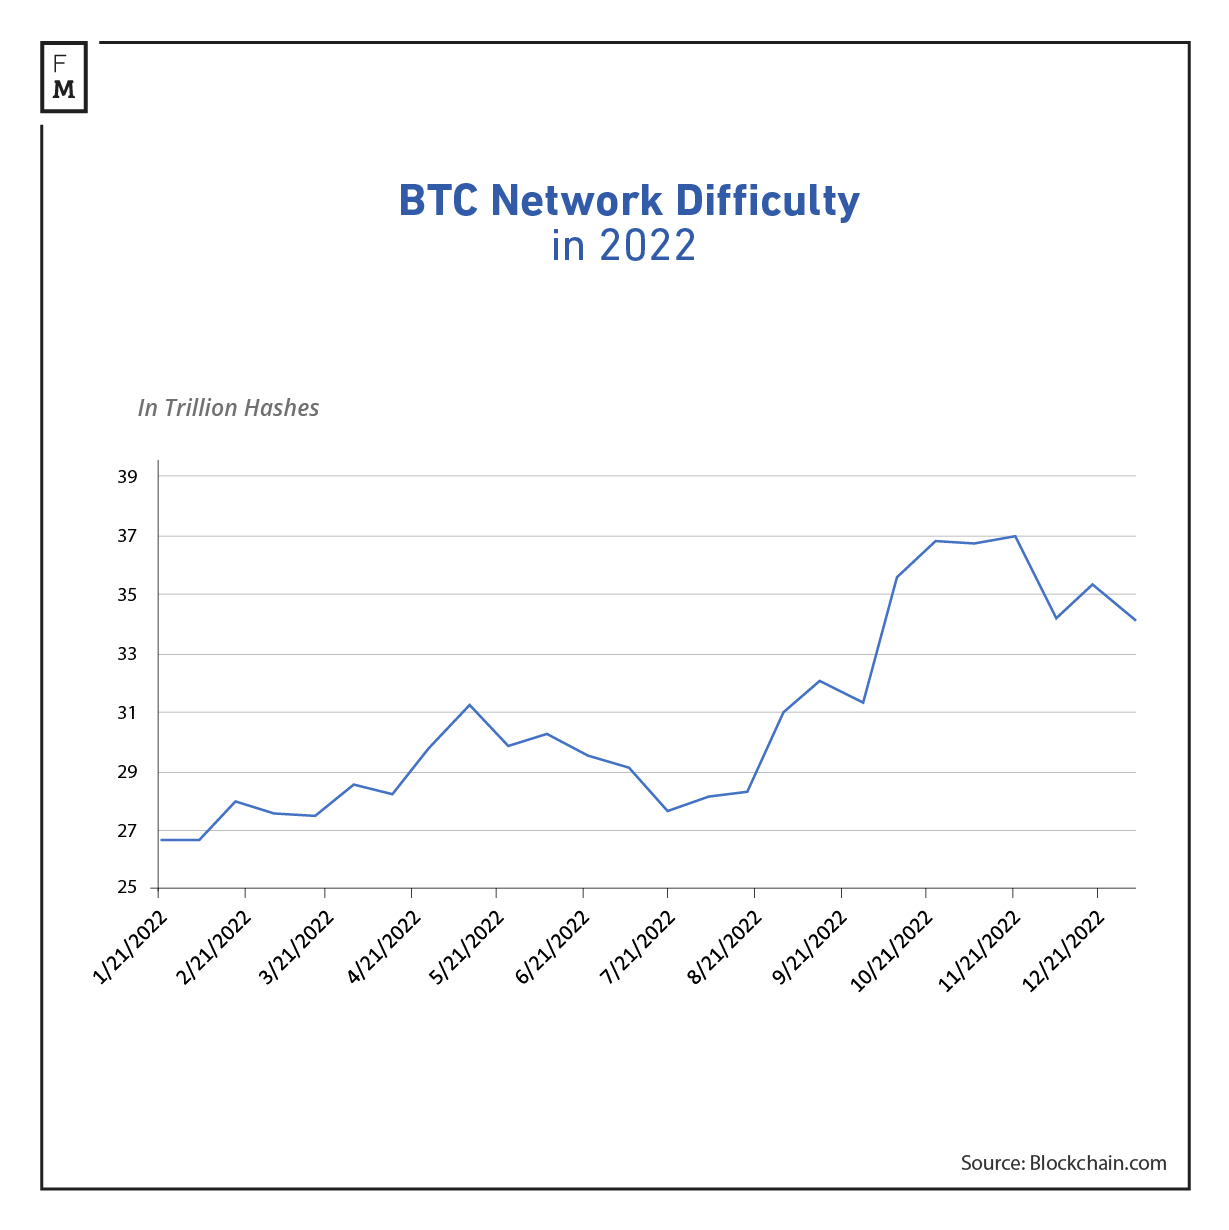 BTC Network Difficulty